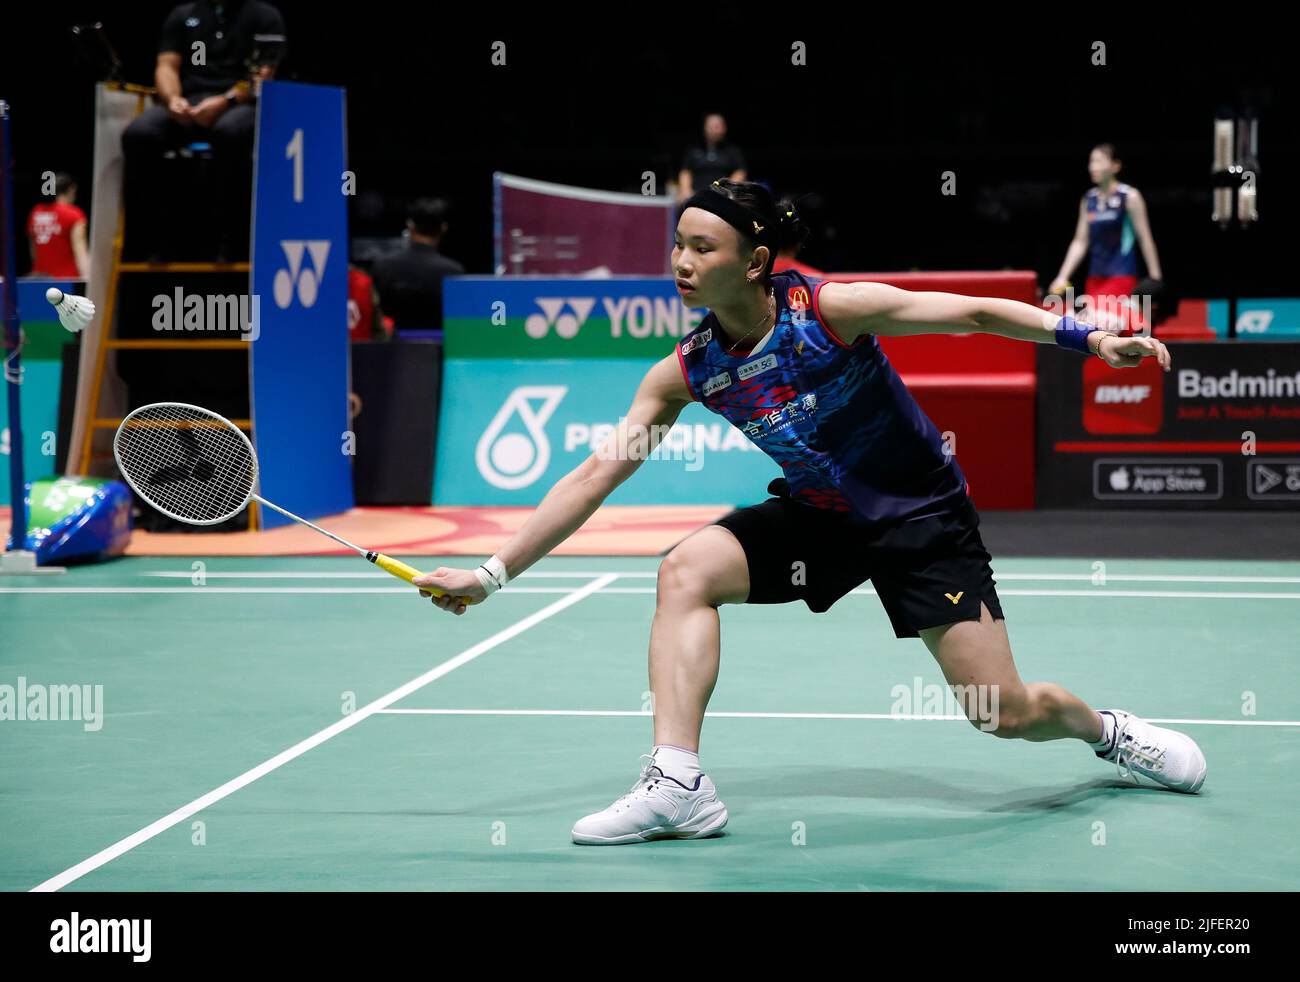 Tai Tzu Ying of Taiwan competes against Chen Yu Fei of China during the Womens Single semi-finals match of the Petronas Malaysia Open 2022 at Axiata Arena, Bukit Jalil